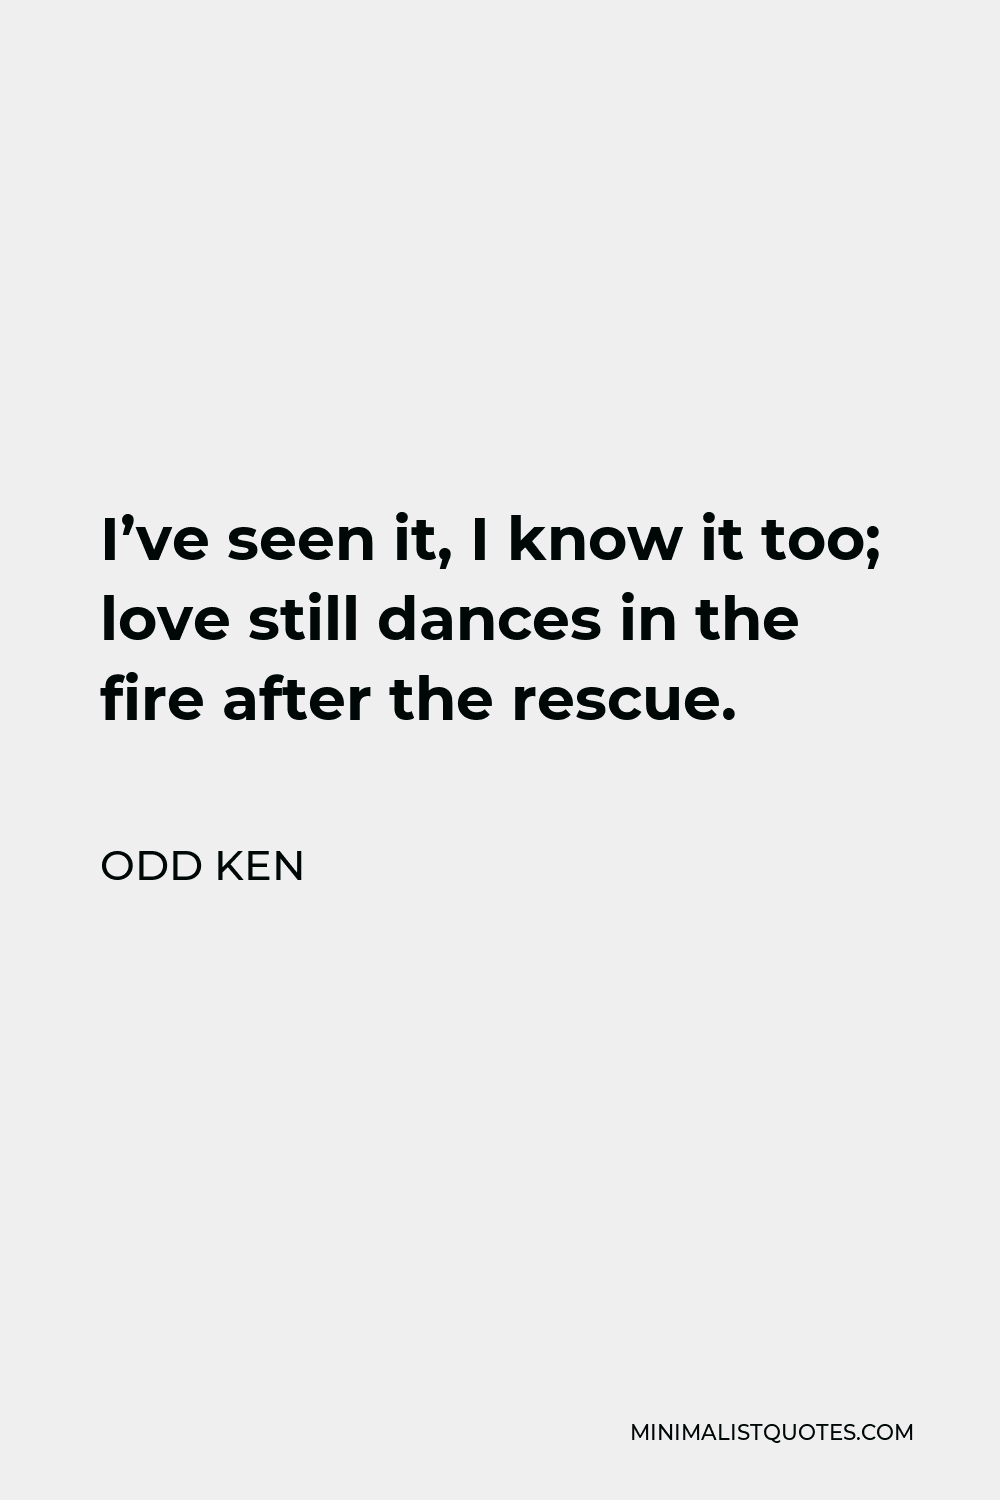 Odd Ken Quote - I’ve seen it, I know it too; love still dances in the fire after the rescue.